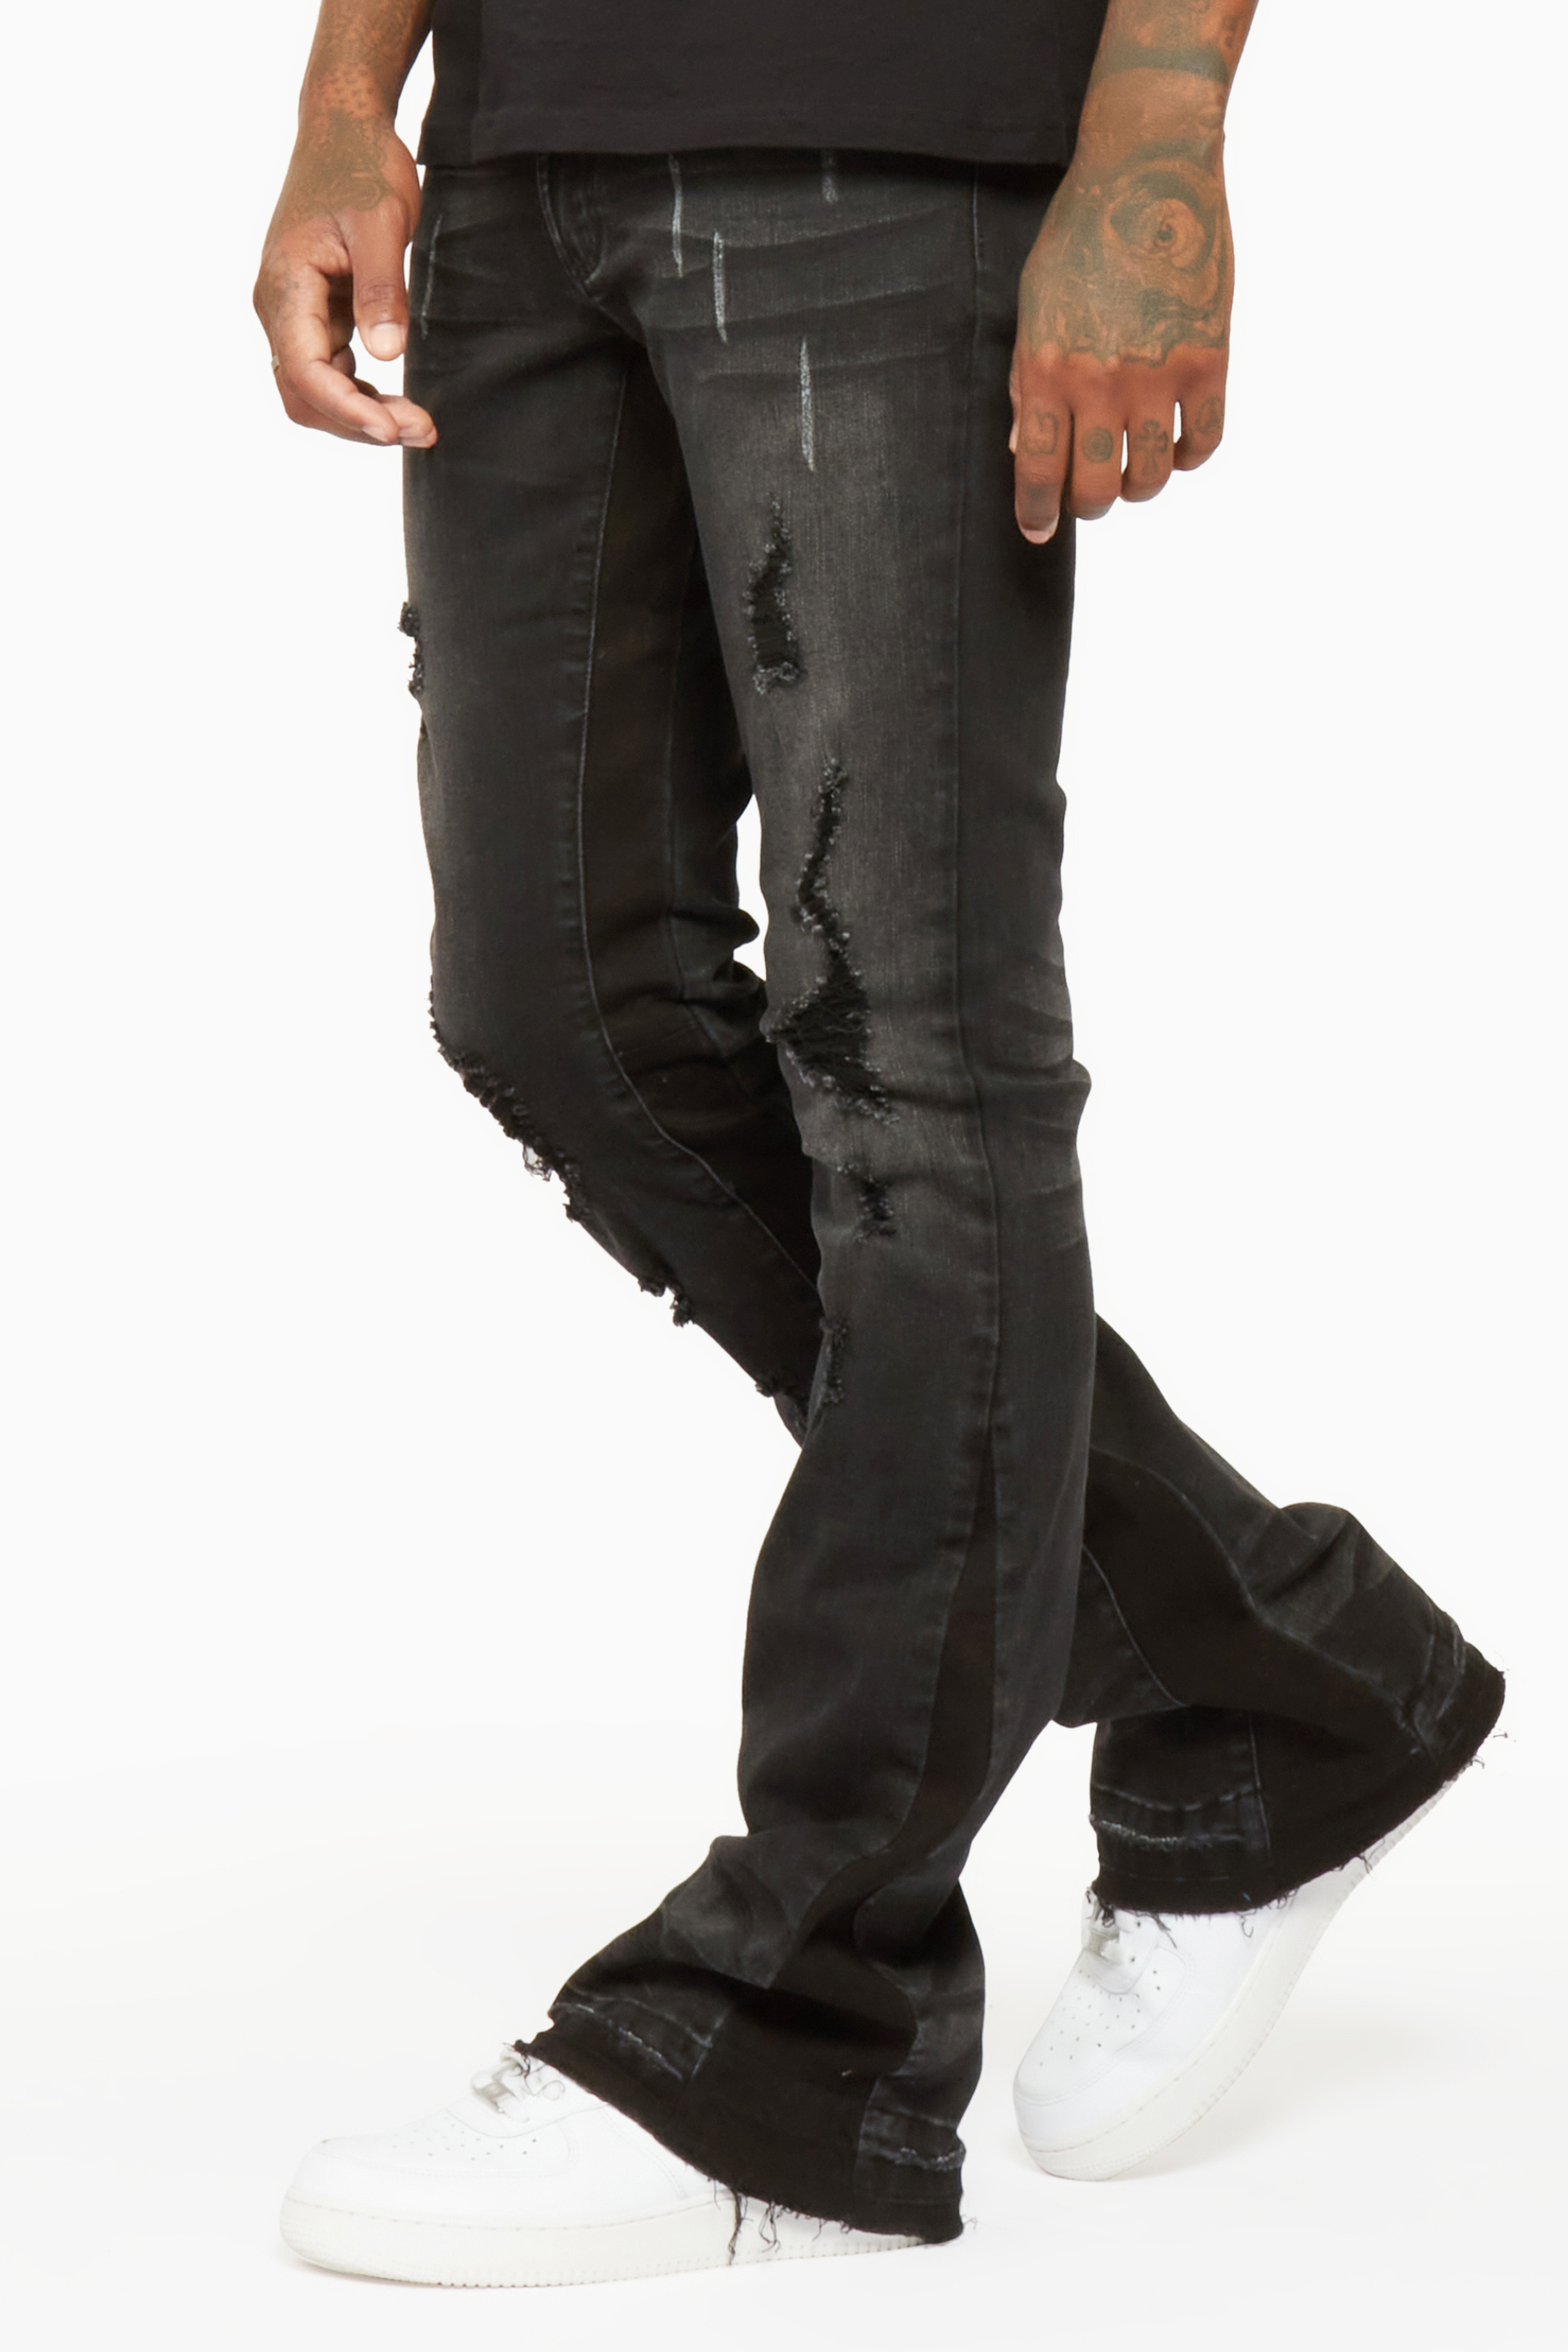 PURPOSE BLACK STACKED FLARE JEAN – Players Closet